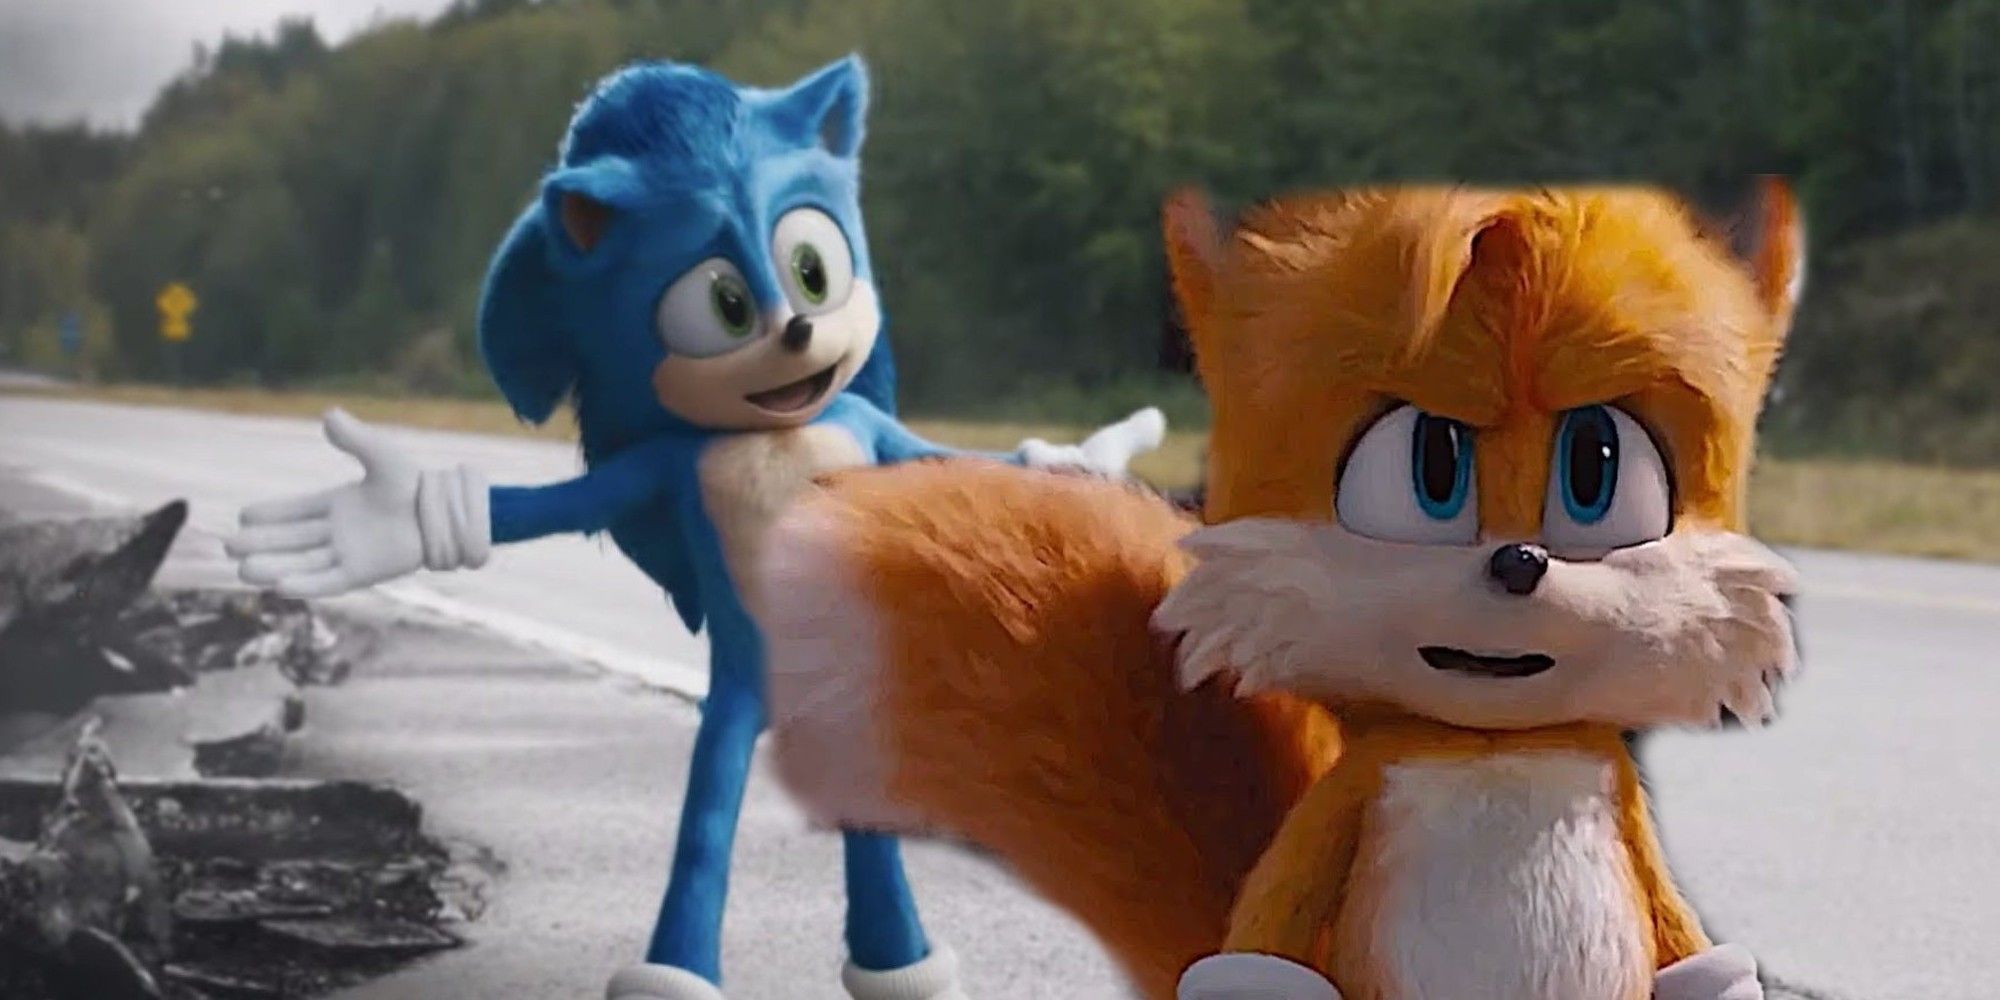 Sonic The Hedgehog Movie - 2 Tails 2 Furious. It's all about the family in  #SonicMovie2 - flying into theatres April 8.